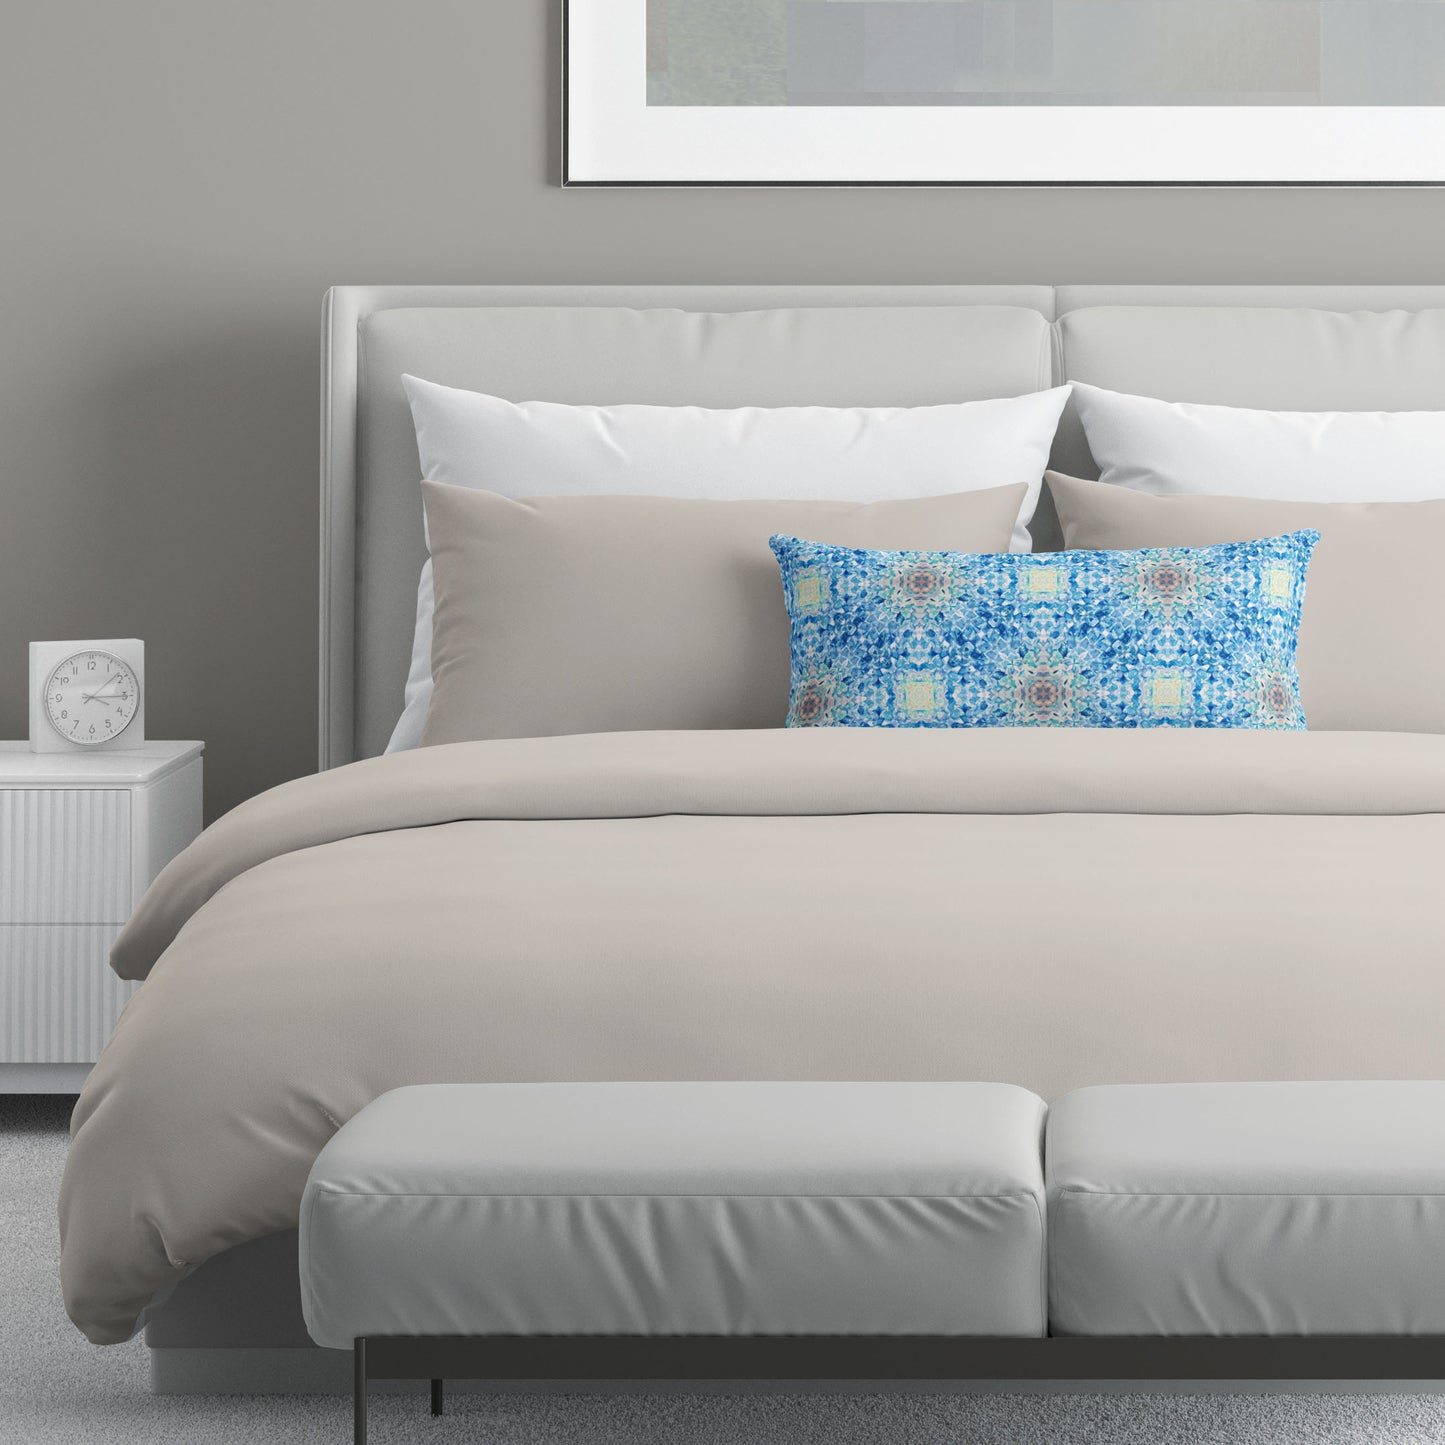 Neutral colored bedroom featuring a bed with a blue abstract patterned lumbar pillow.